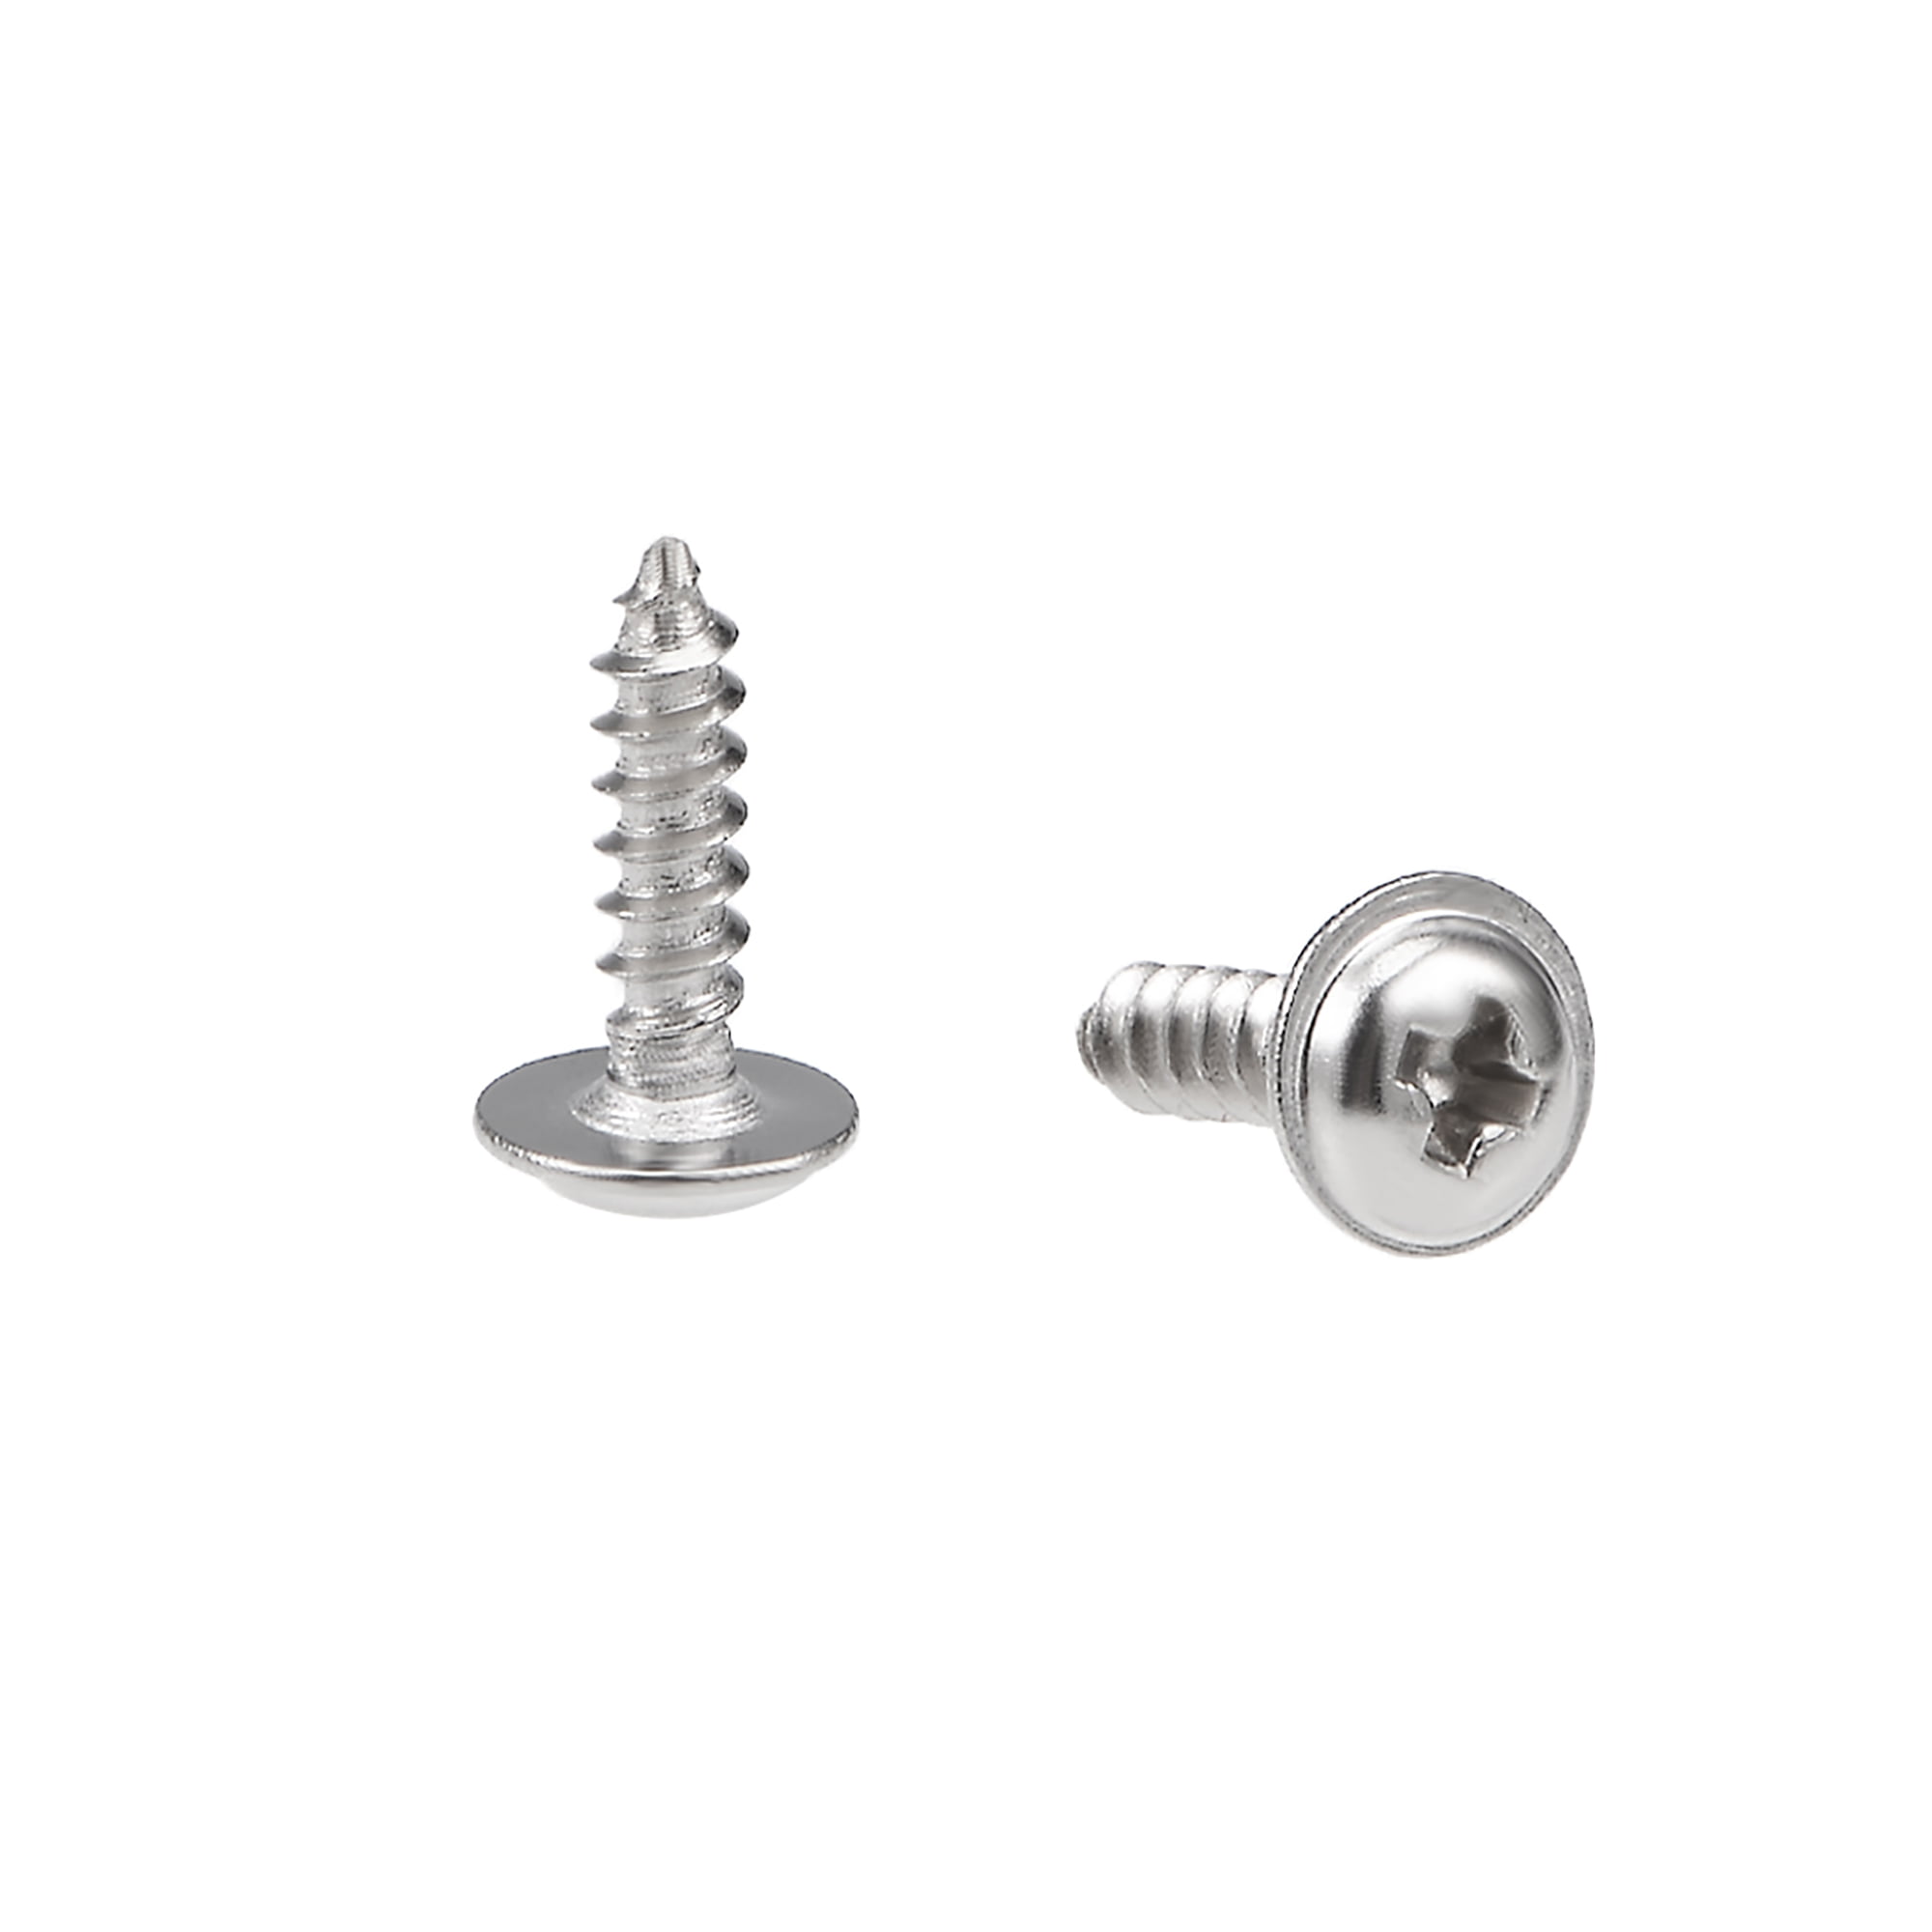 2x8mm Self Tapping Screws Phillips Pan Head With Washer Screw Bolts 50Pcs 